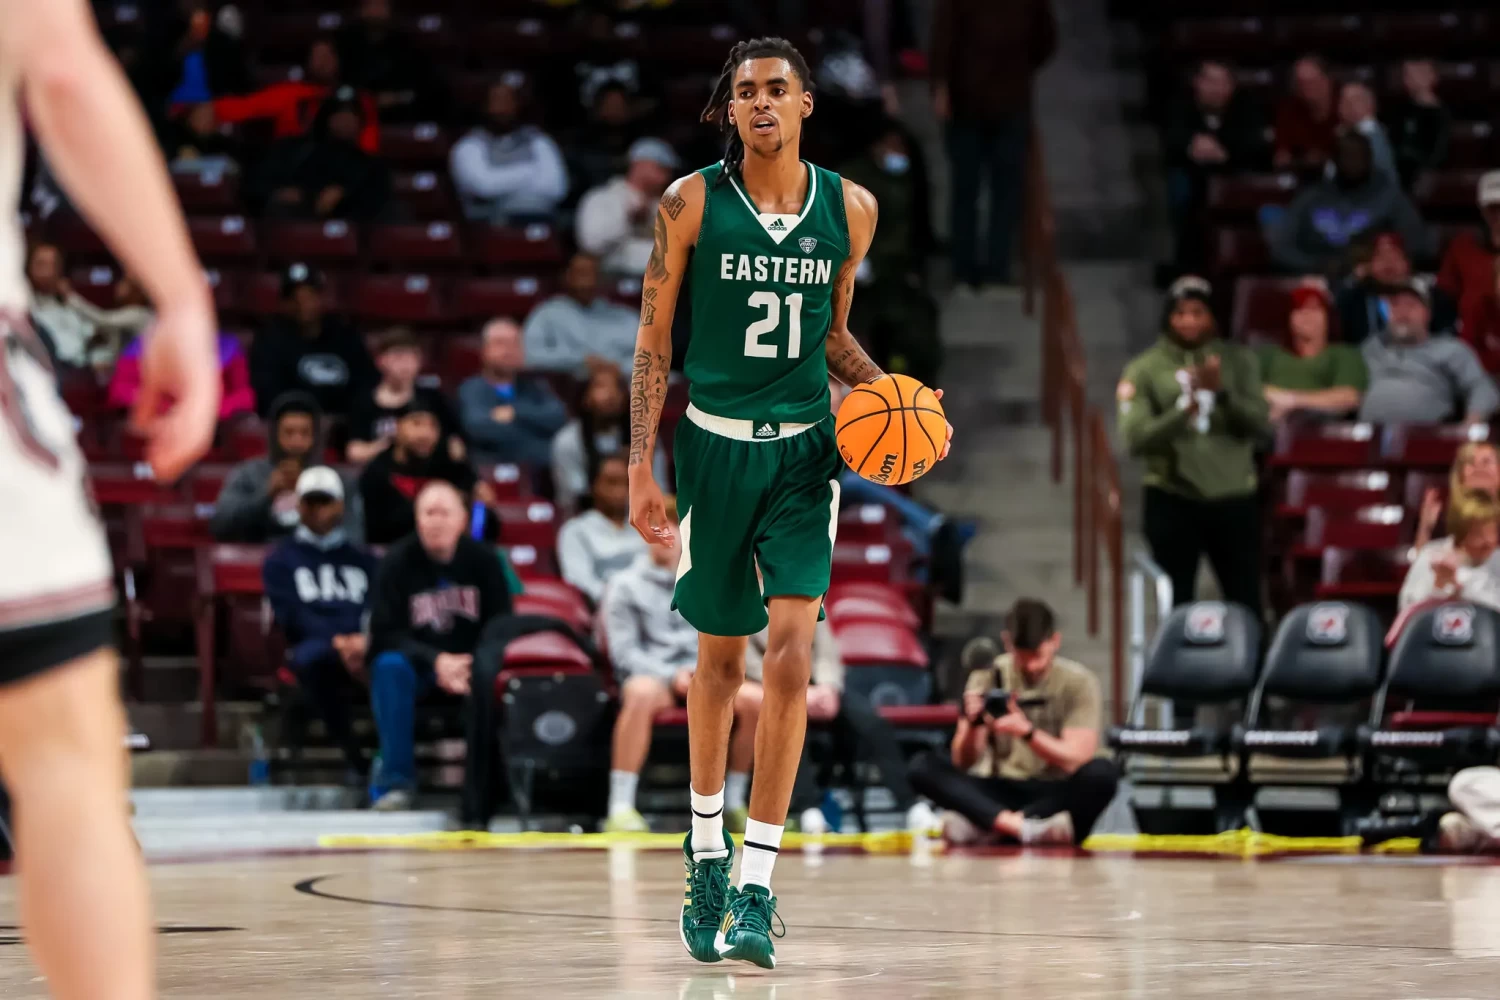 Emoni Bates played one season at Eastern Michigan, in his hometown, Ypsilanti, but is expected to enter the upcoming N.B.A. draft.Credit...Jeff Blake/USA Today Sports, via Reuters